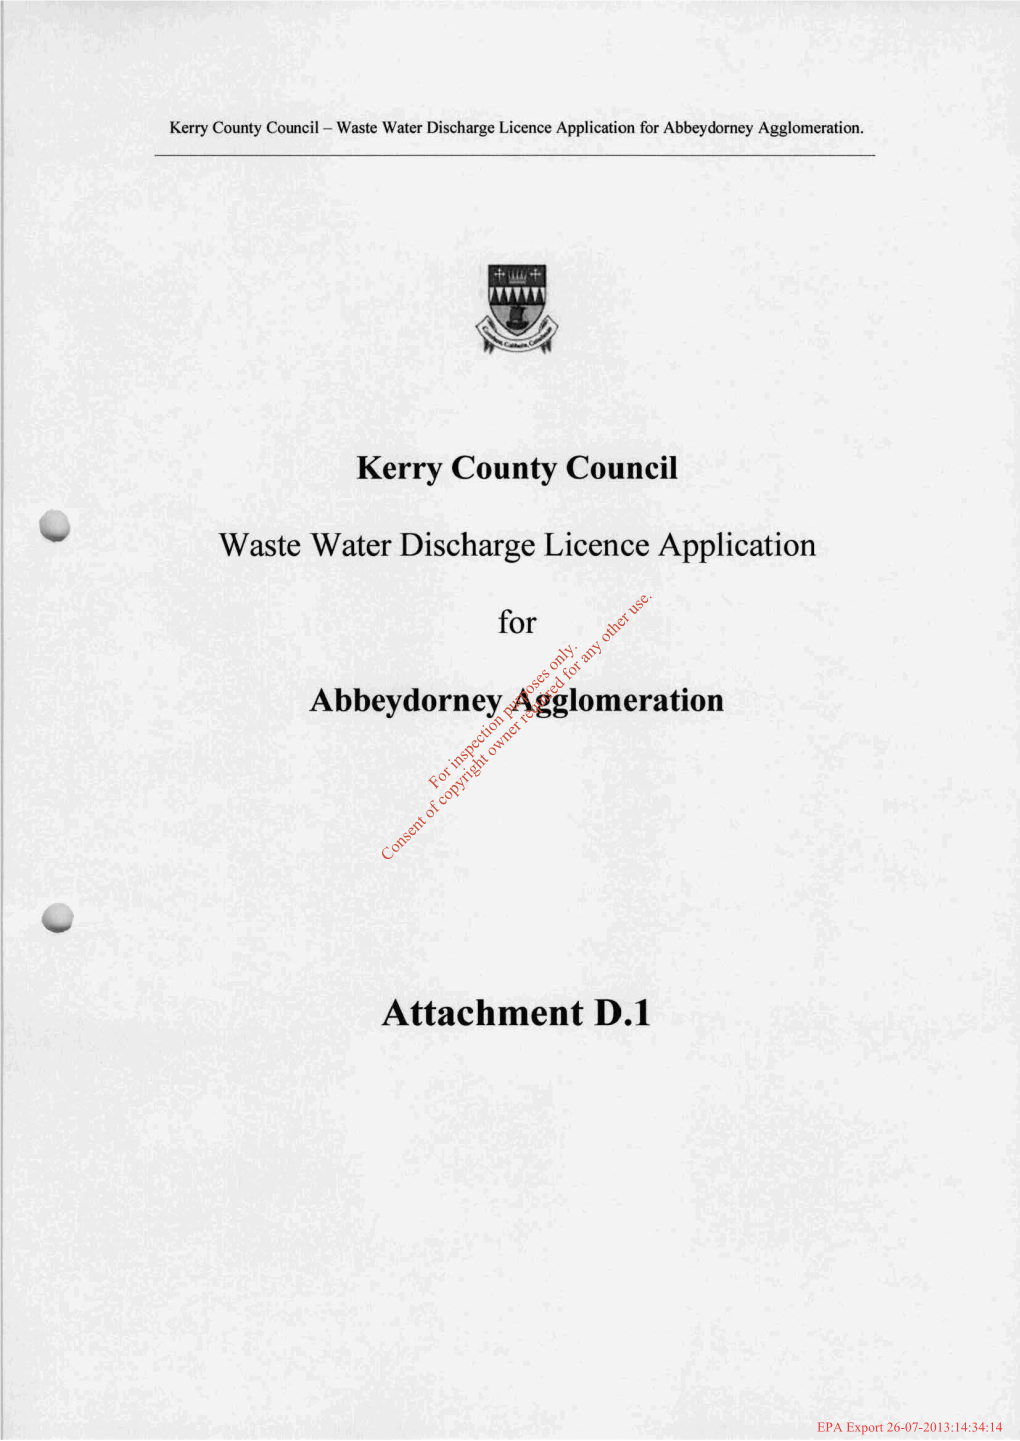 Kerry County Council Waste Water Discharge Licence